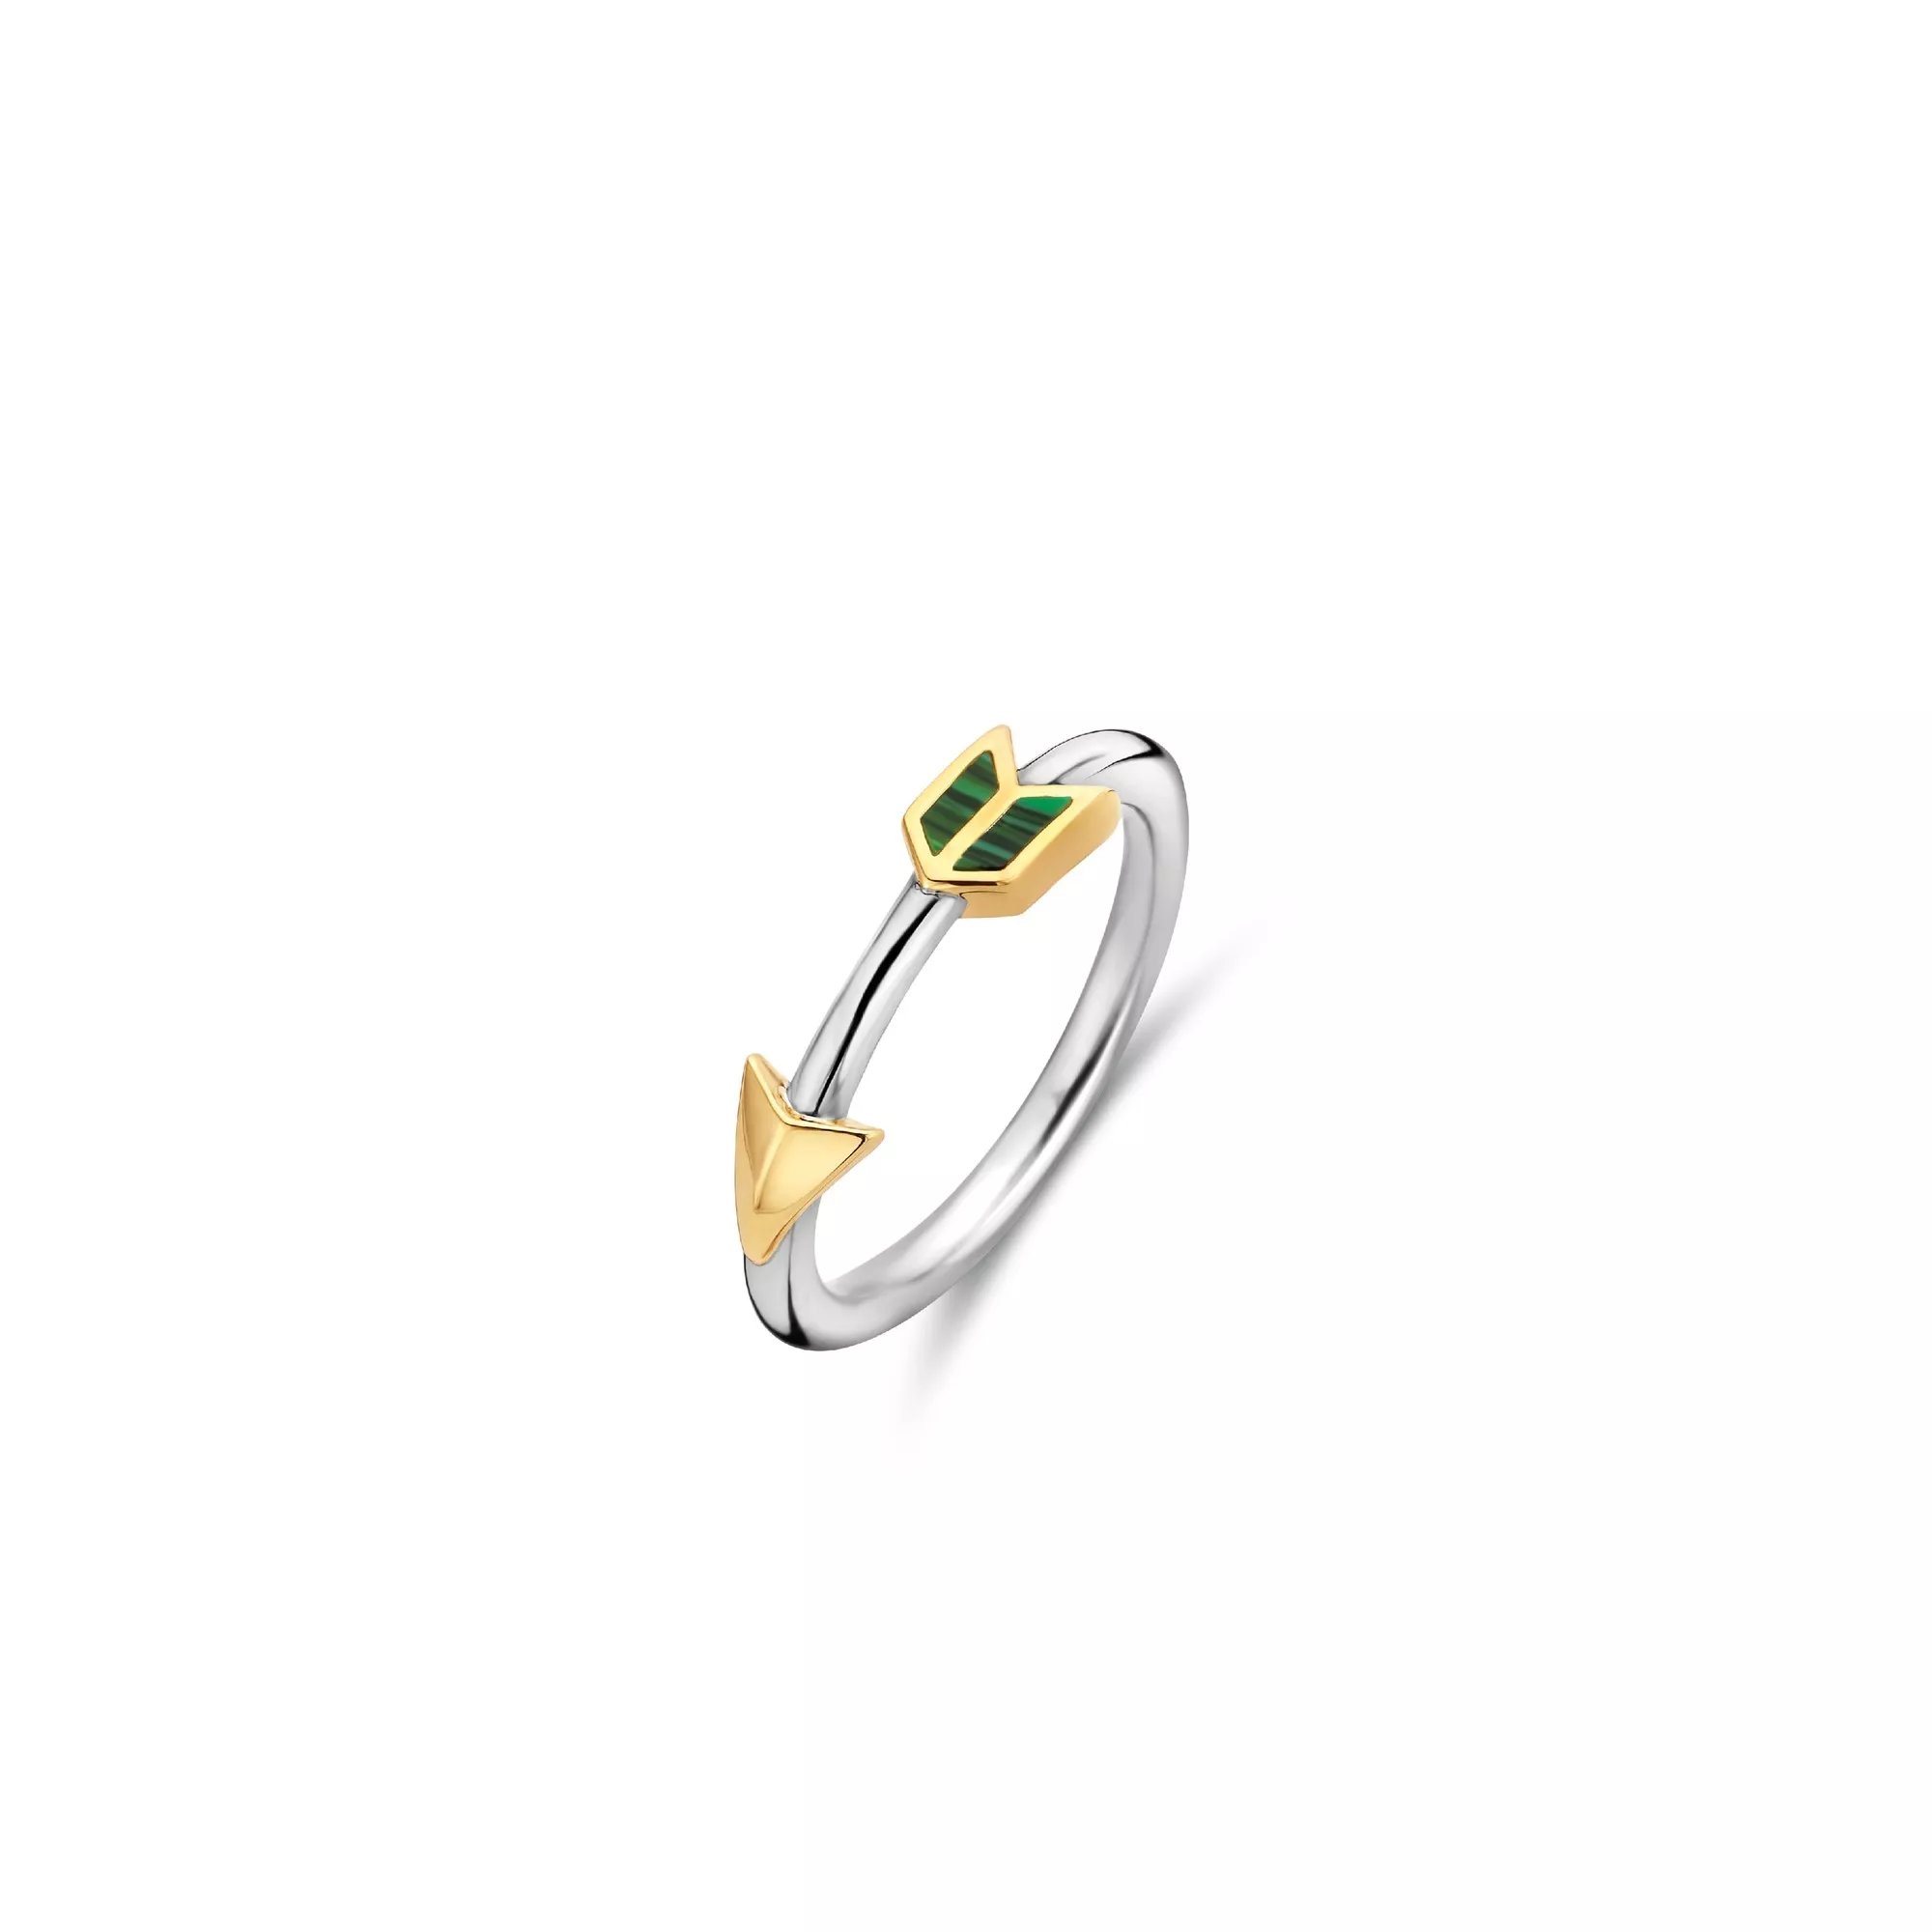 TI SENTO - Milano Ring 12198MA Zilver gold plated Maat 48